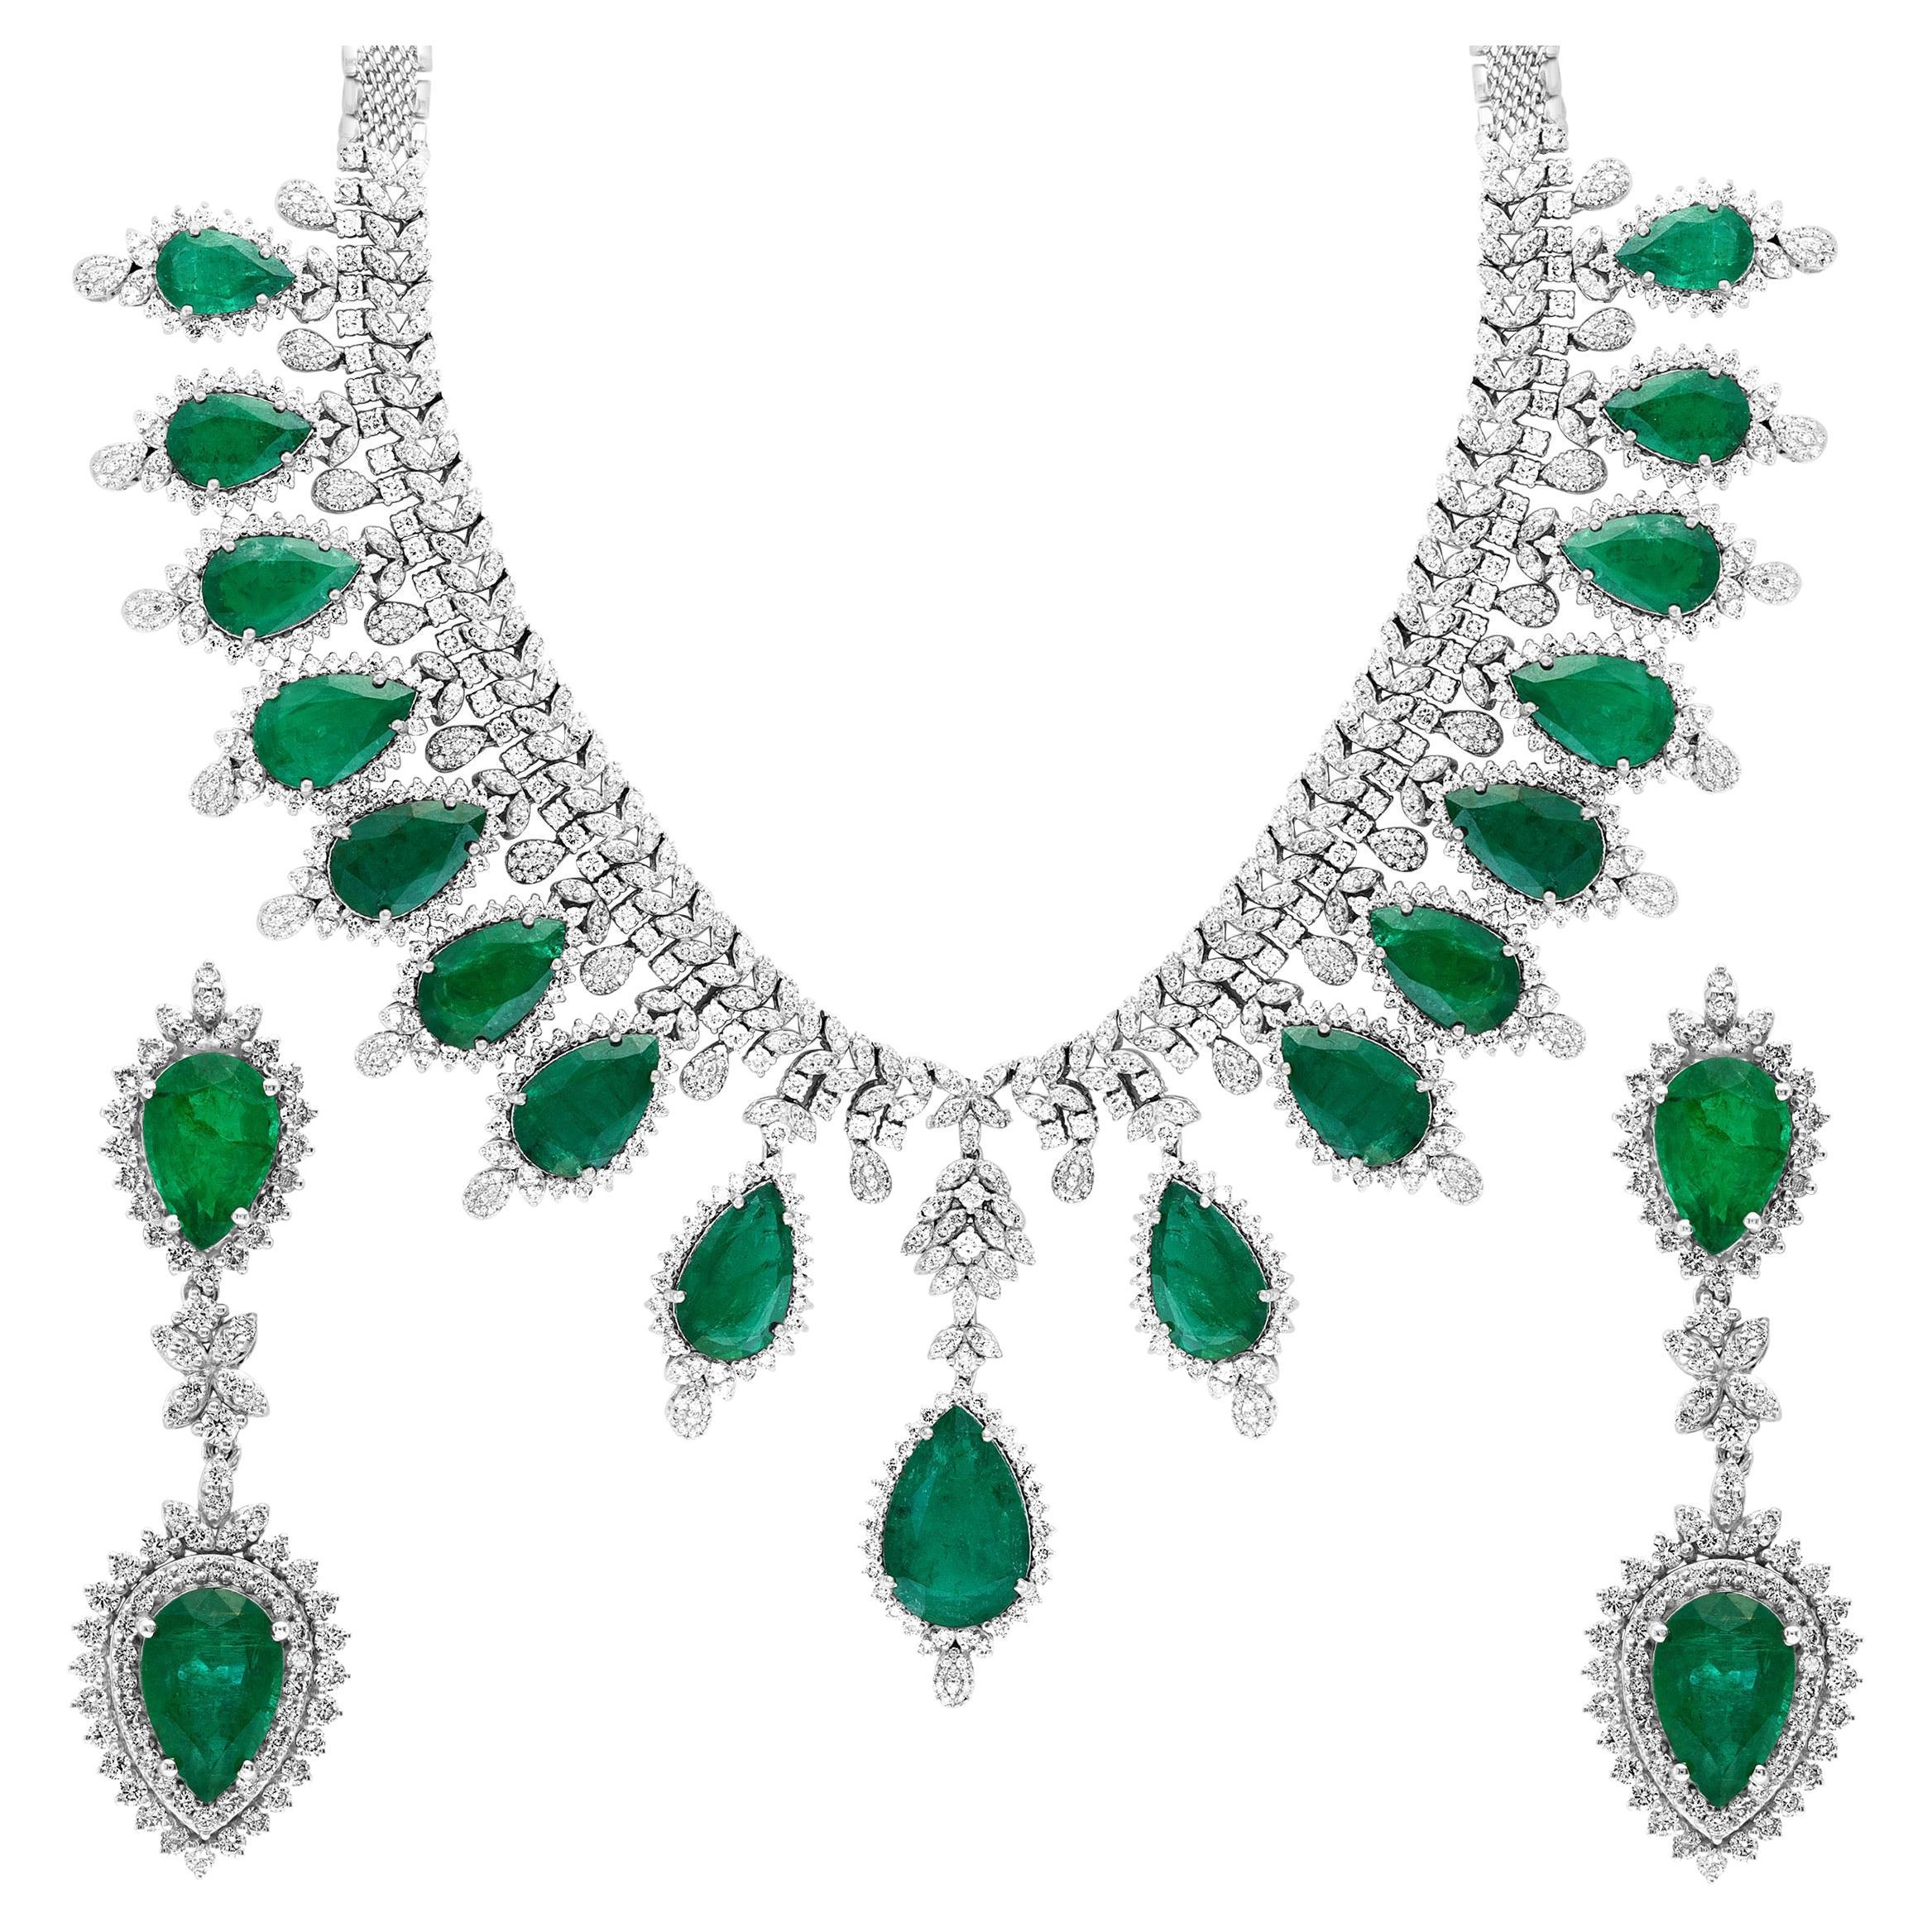 73ct Zambian Emerald and 22ct Diamond Necklace and Earring Bridal Suite For Sale